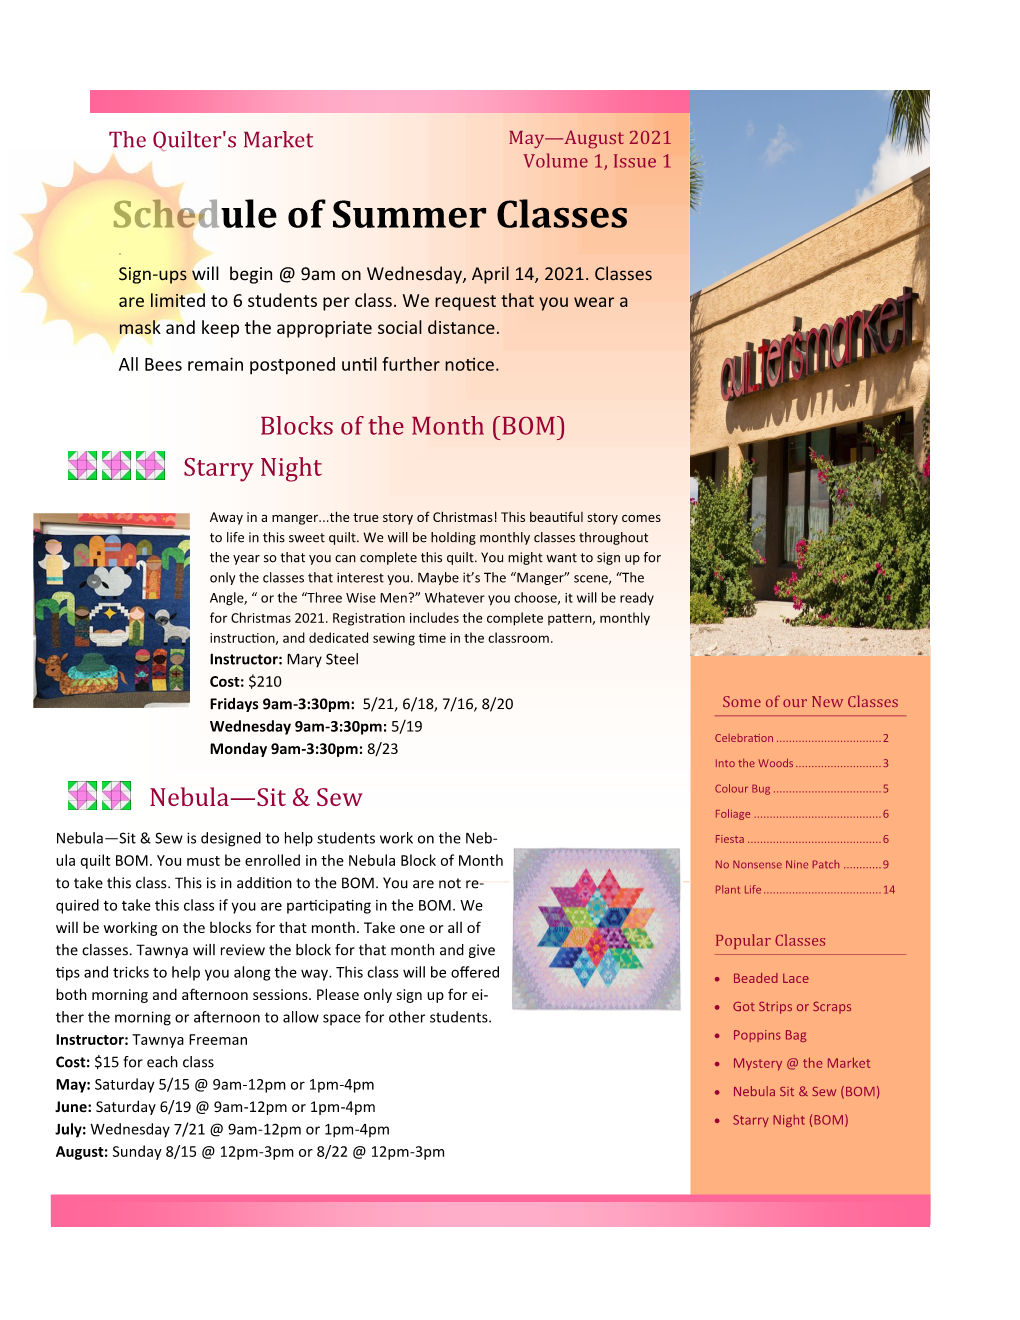 Here Is the Summer 2021 Newsletter